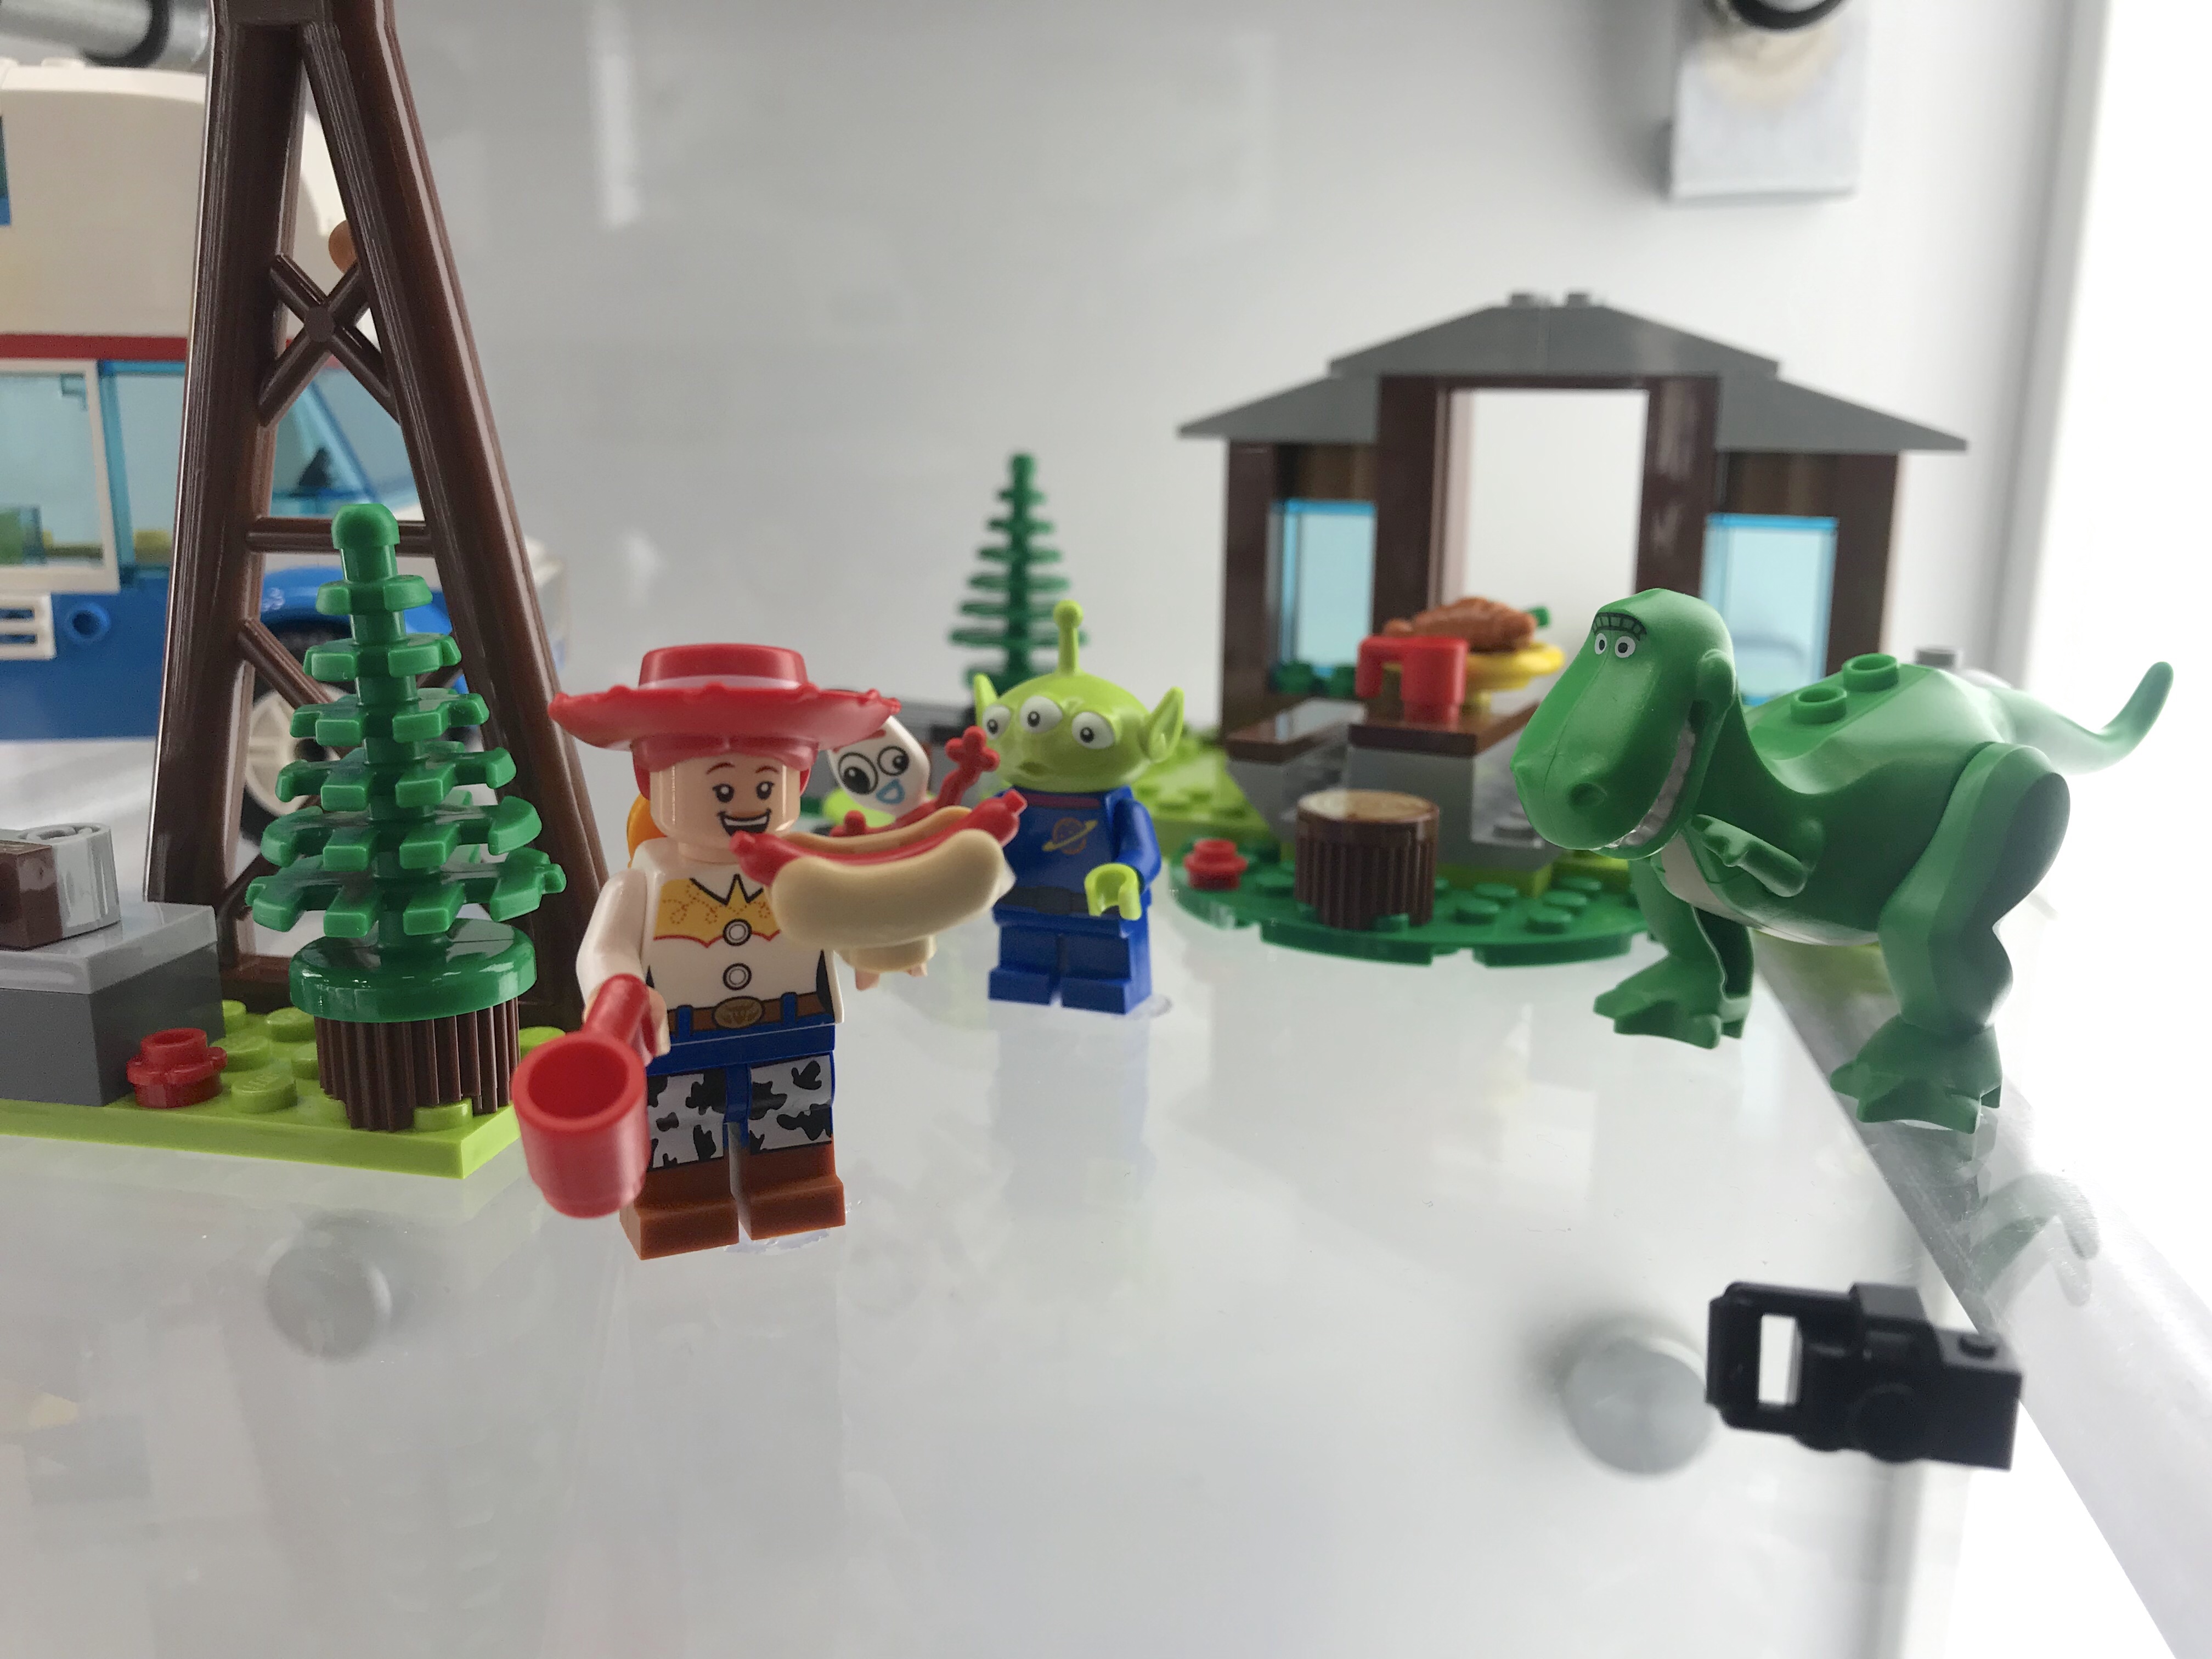 Coming Soon, Toy Story 4 Lego Sets!